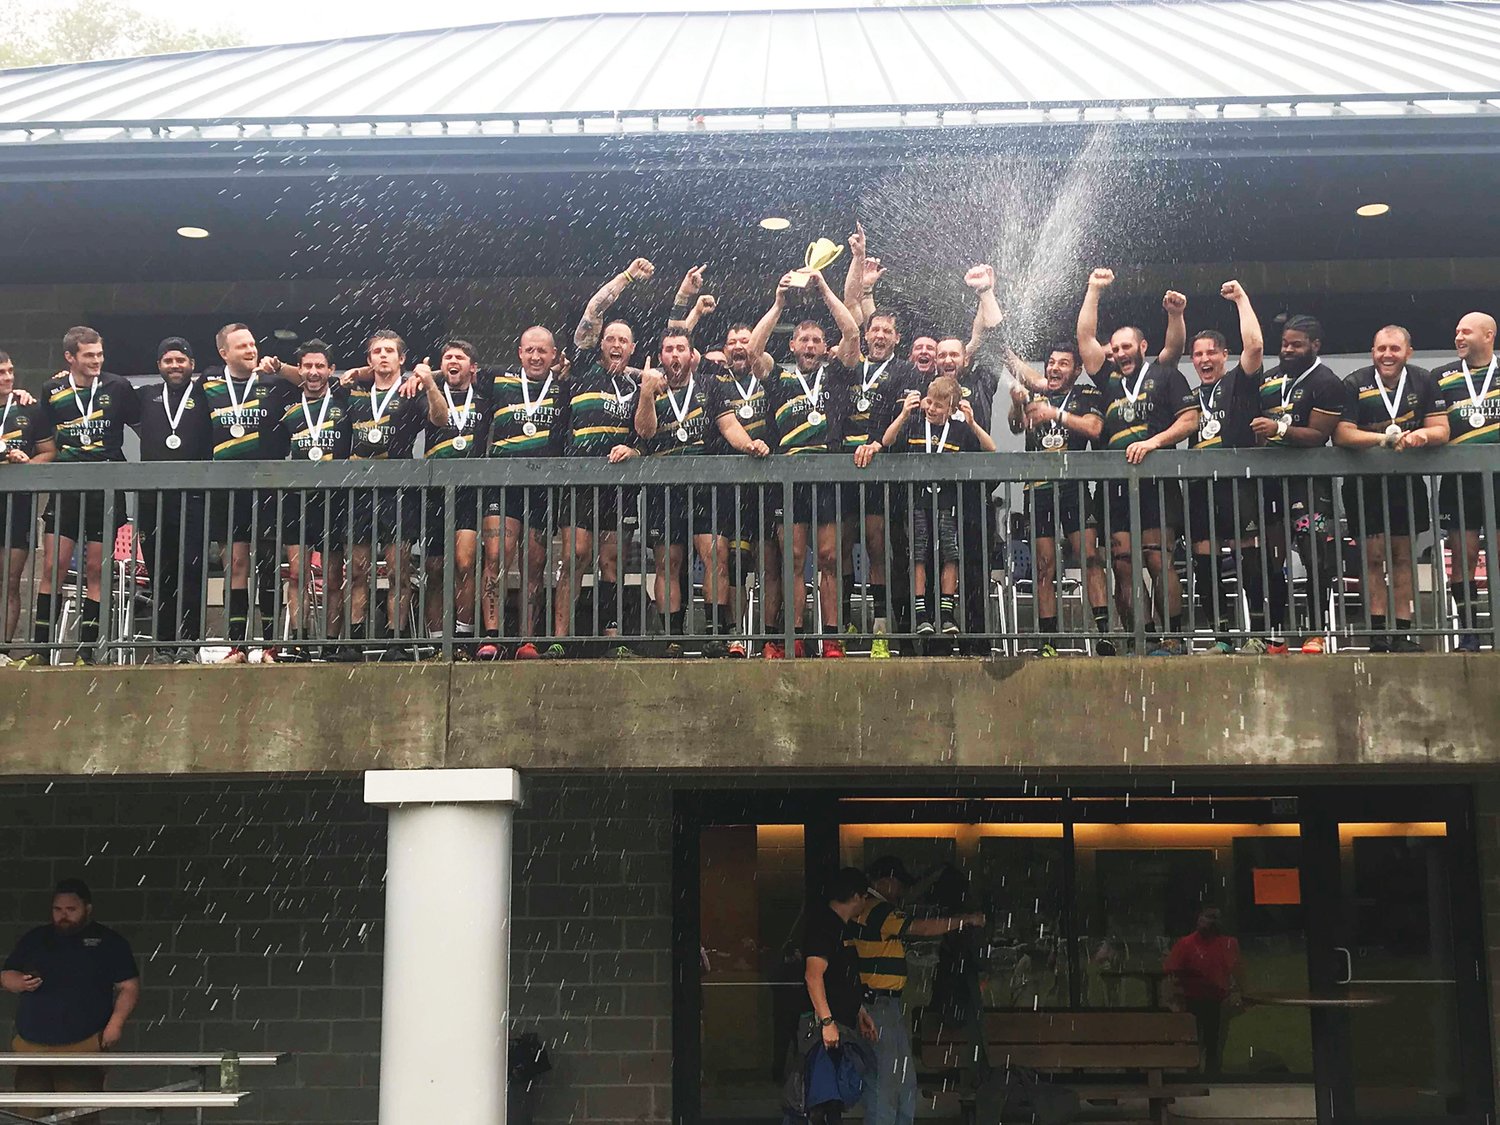 Members of the Doylestown Rugby men’s team celebrate after defeating Raleigh 47-14 May 4 at Founders Field in Pittsburgh for their second consecutive MAC championship.